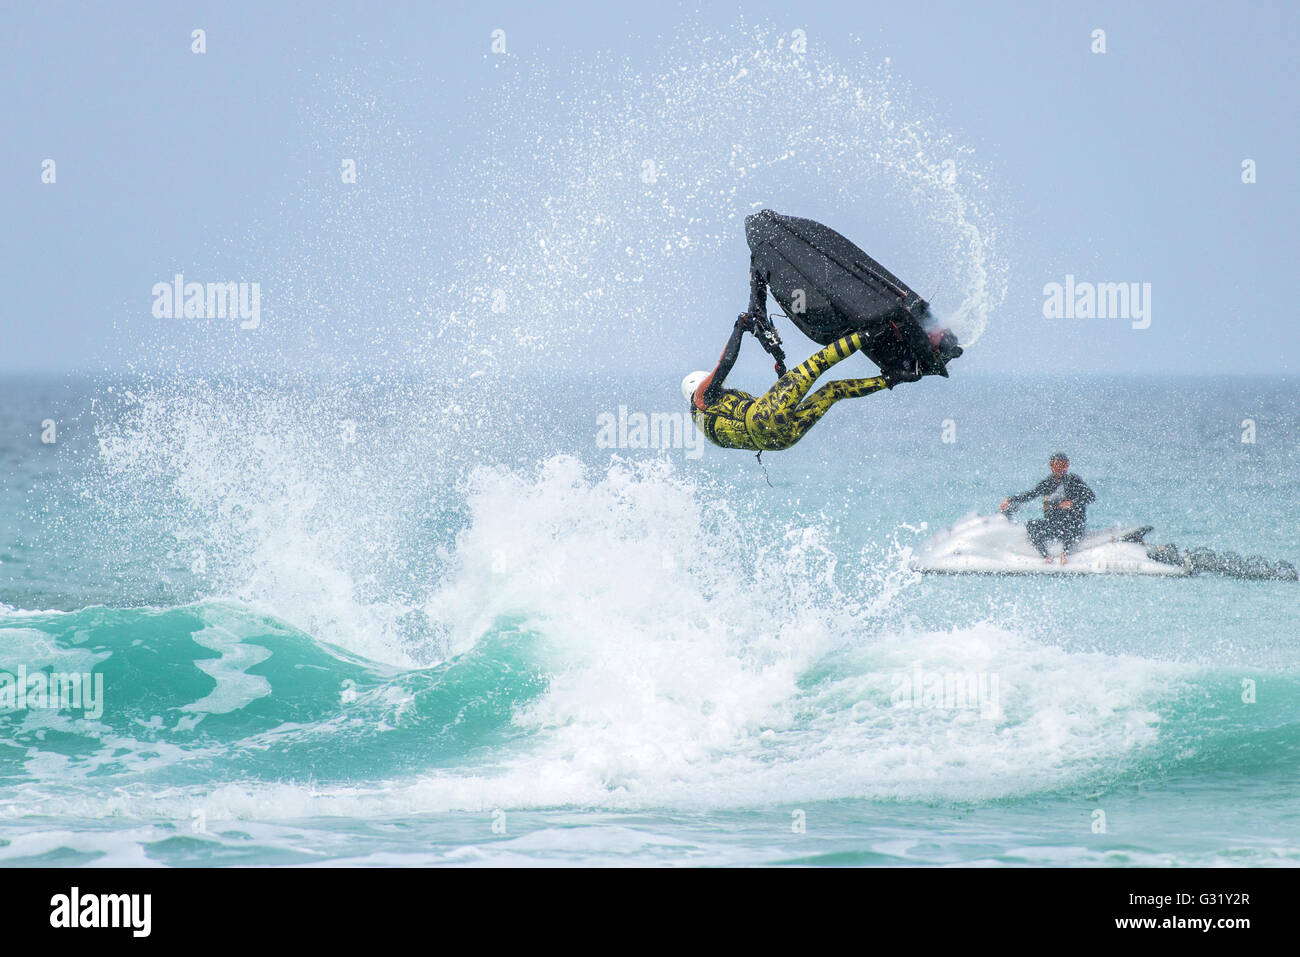 Fistral, Newquay, Cornwall. 6th June, 2016.  Dan Foy performs a spectacular stunt on his Jet-ski at the IFWA World Freeride Championships.  Photographer: Gordon Scammell/Alamy Live News. Stock Photo